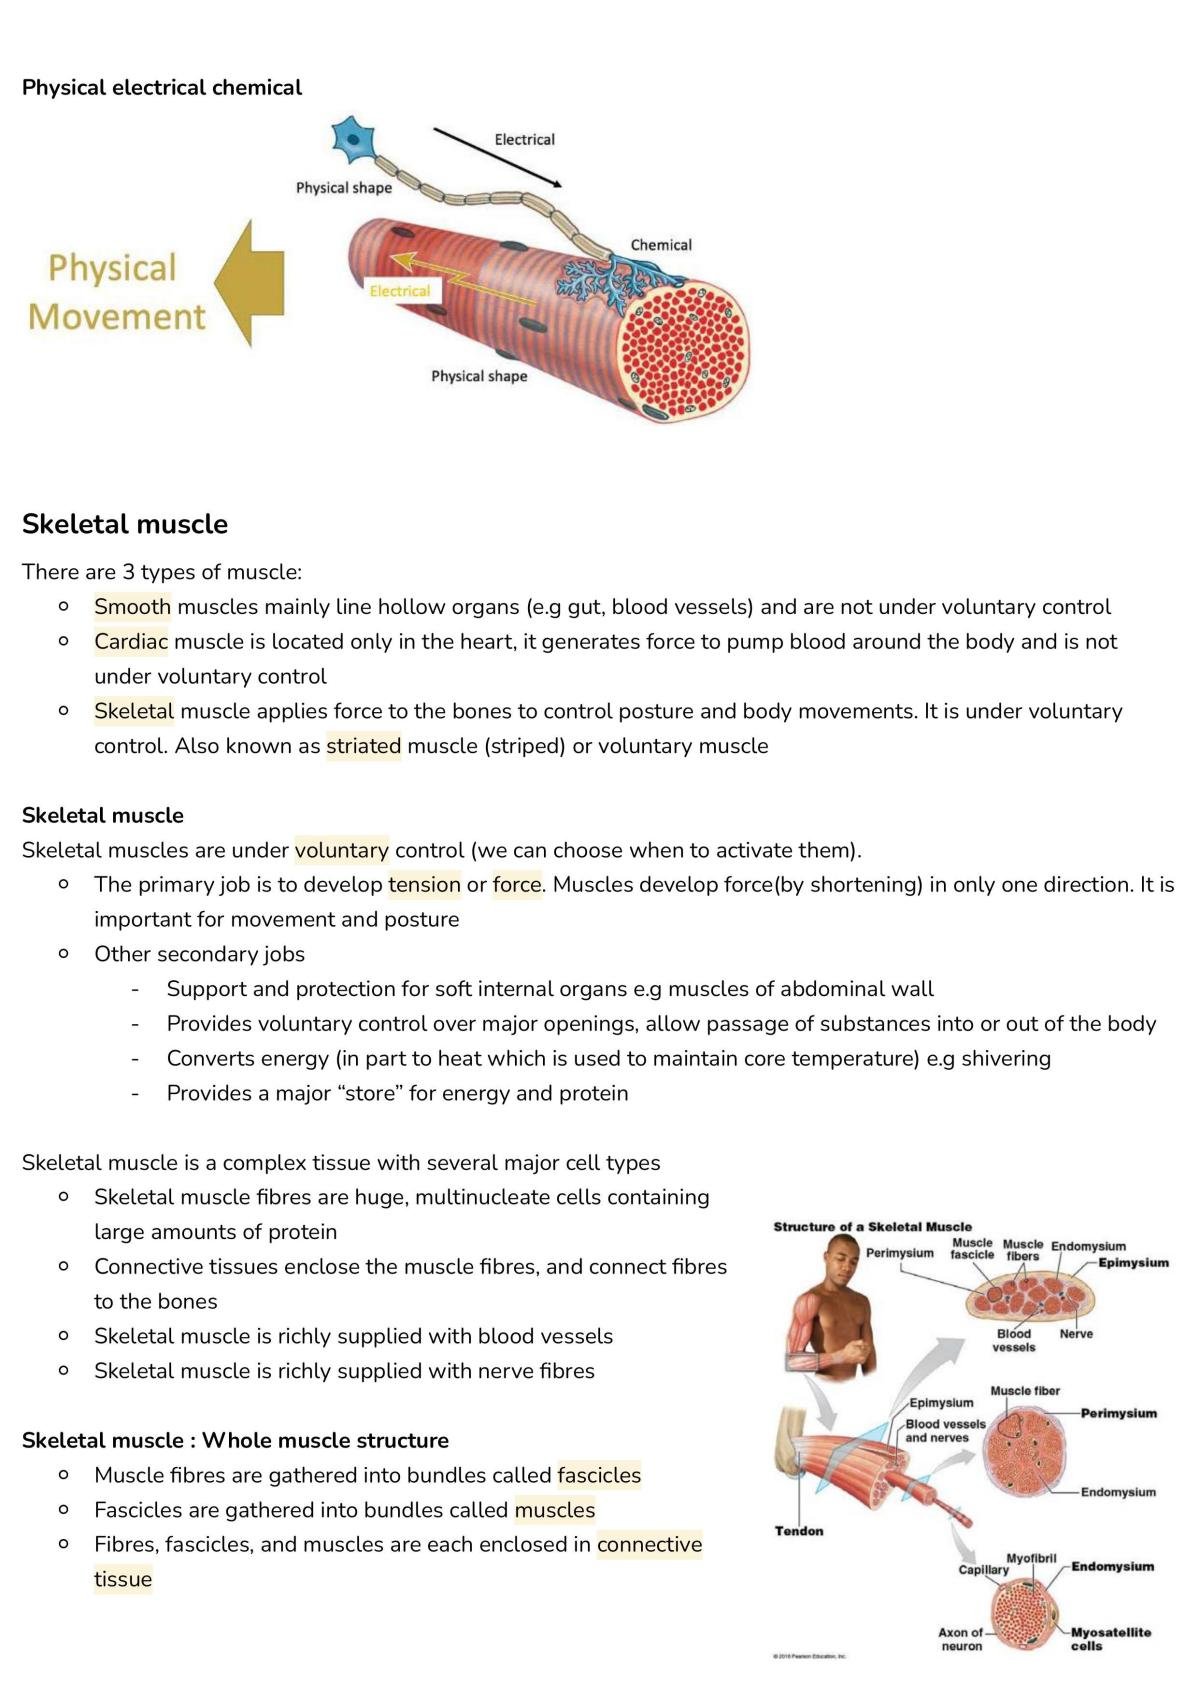 Human Body Systems 1 Revision Guide - Page 30